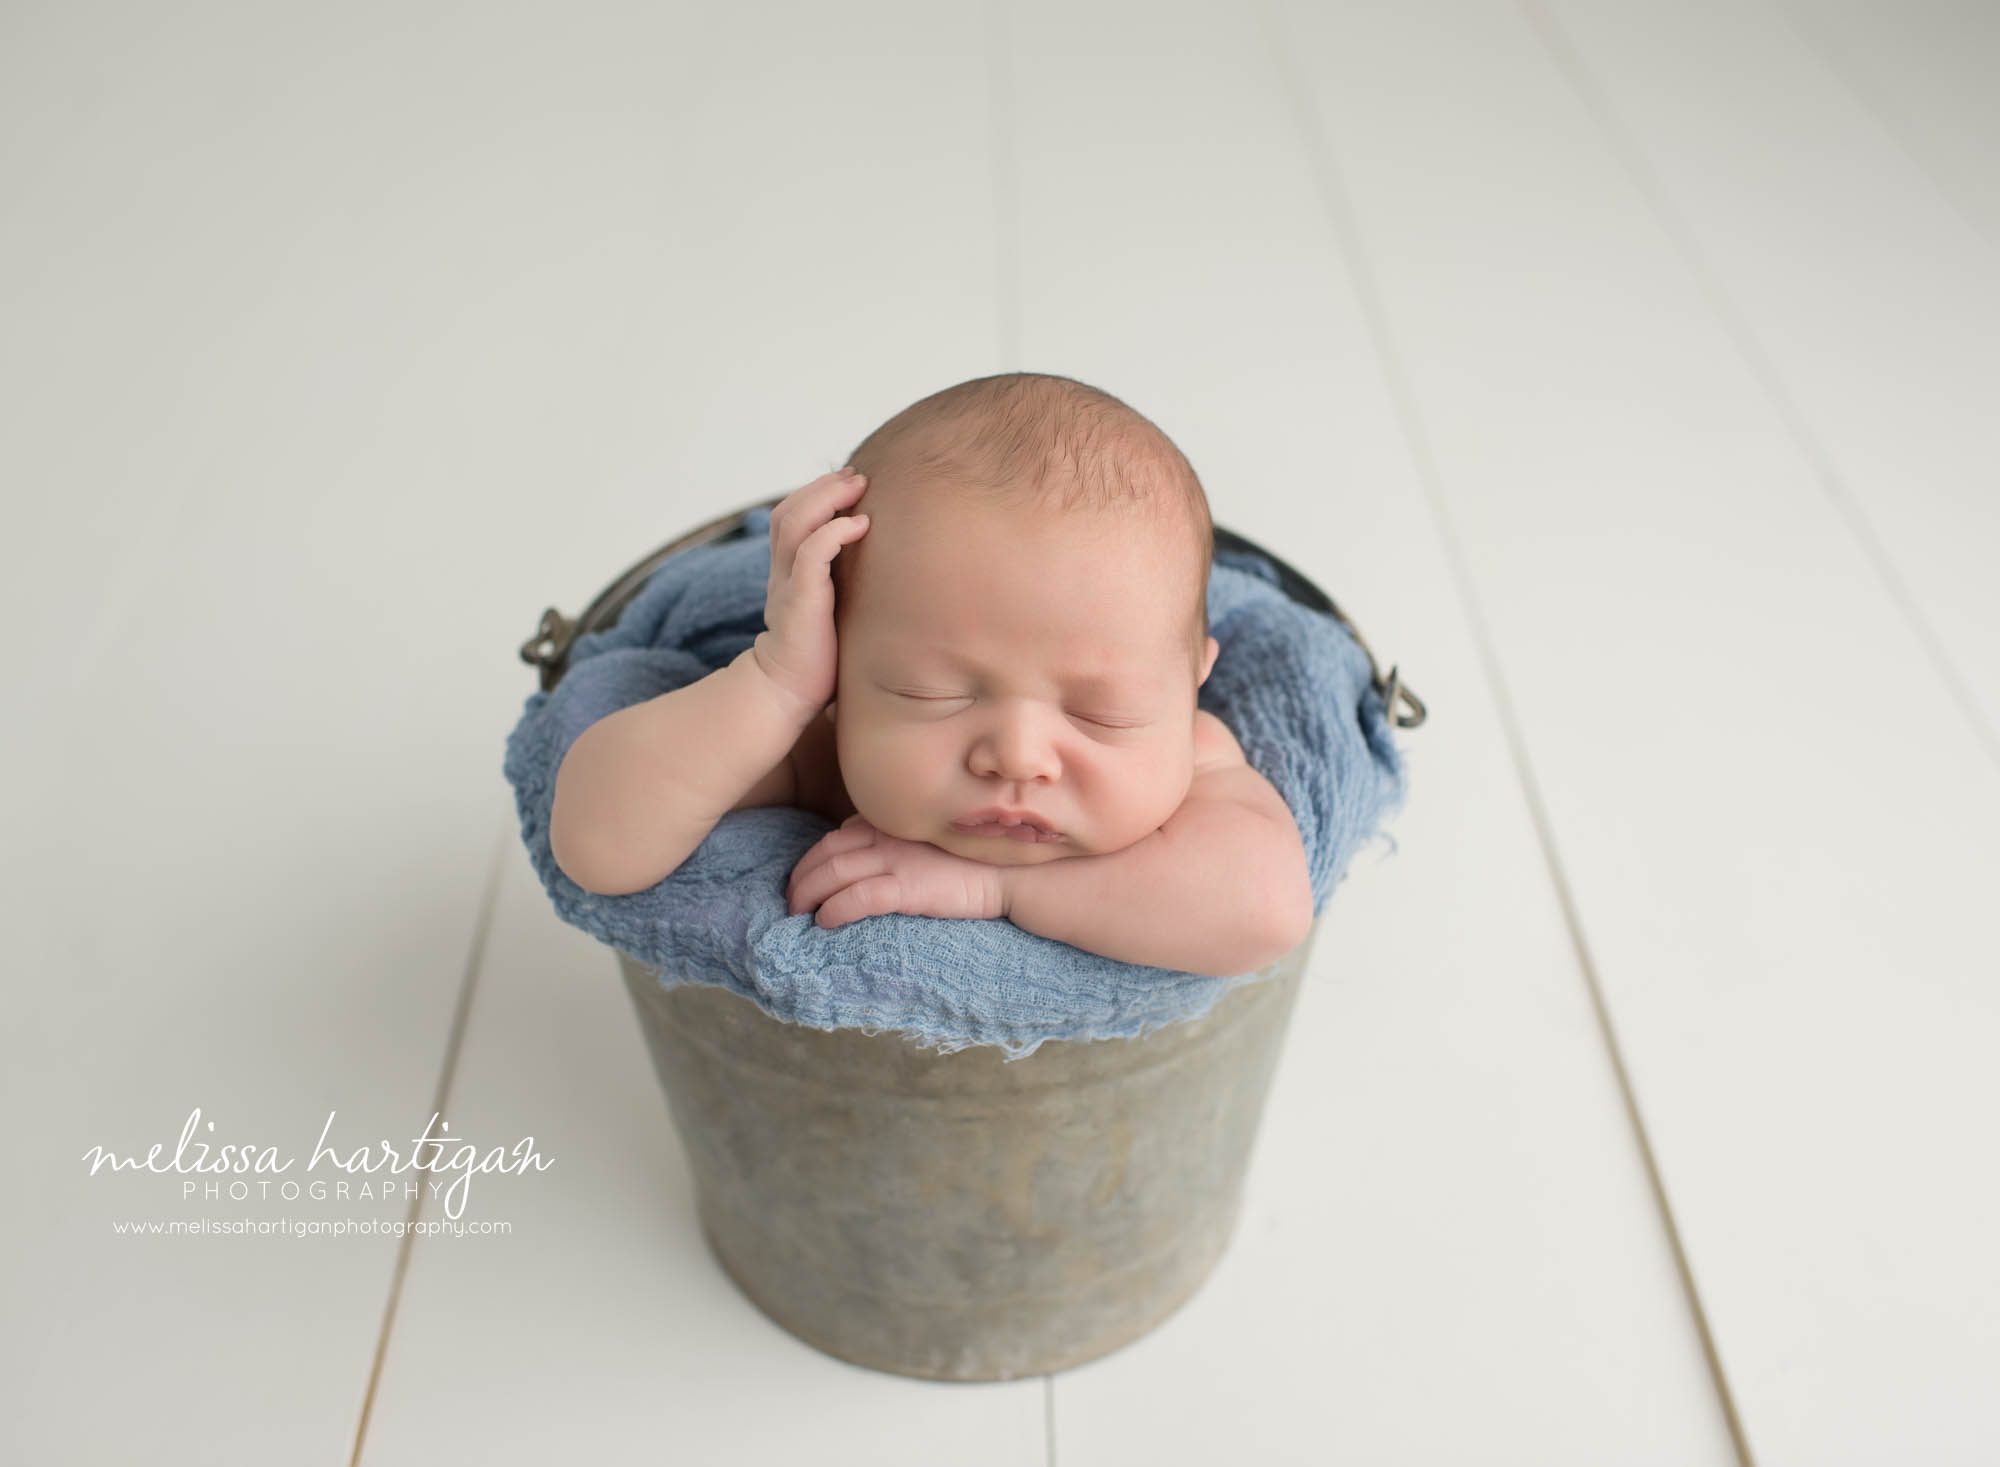 Baby boy posed in metal bucket with hand on the side of his head